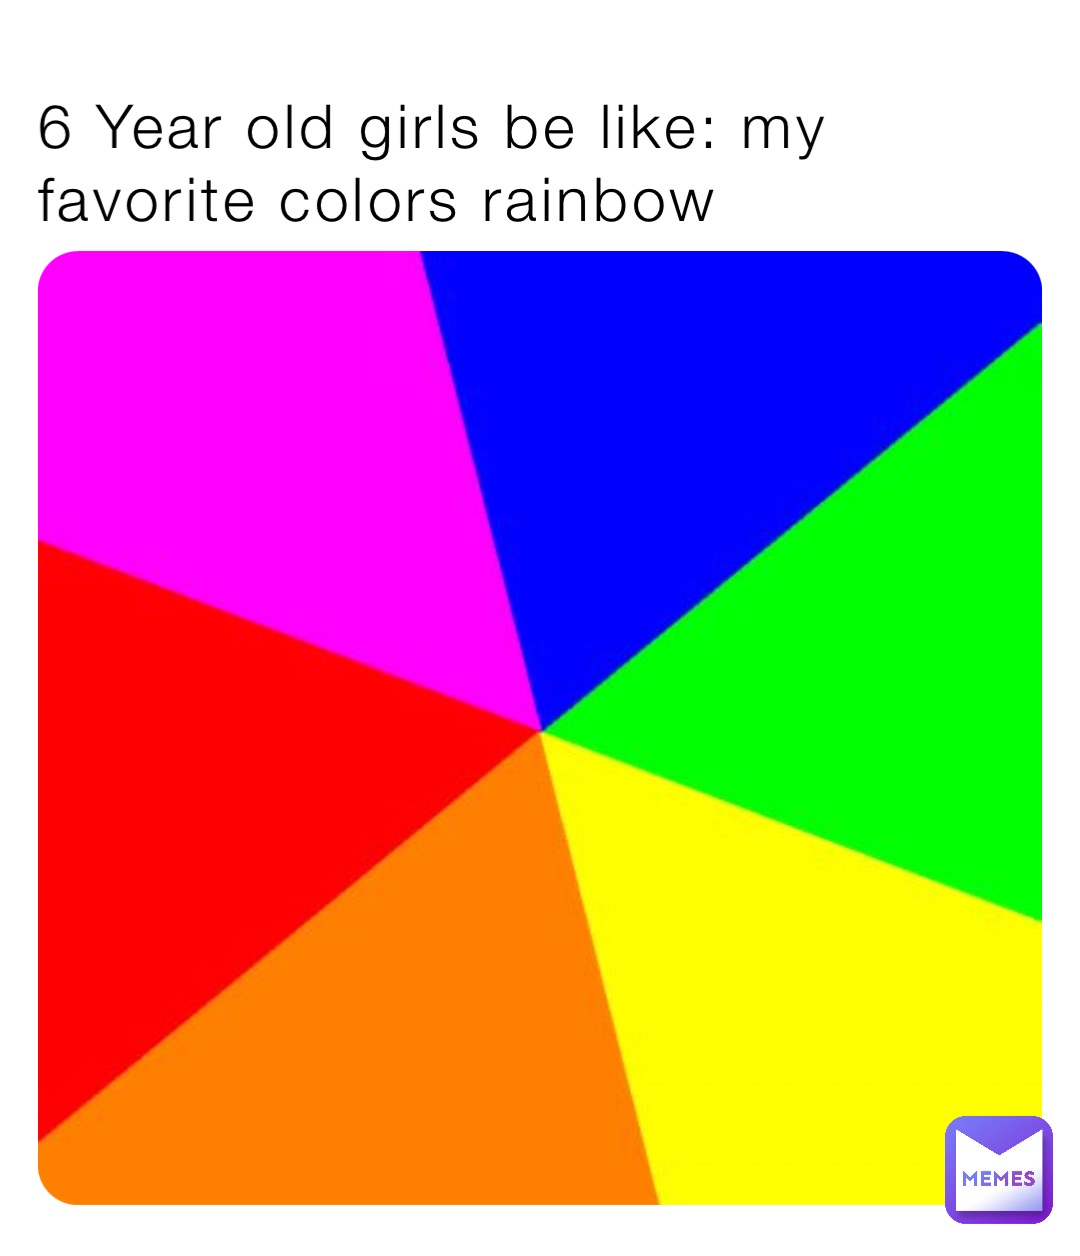 6 Year old girls be like: my favorite colors rainbow